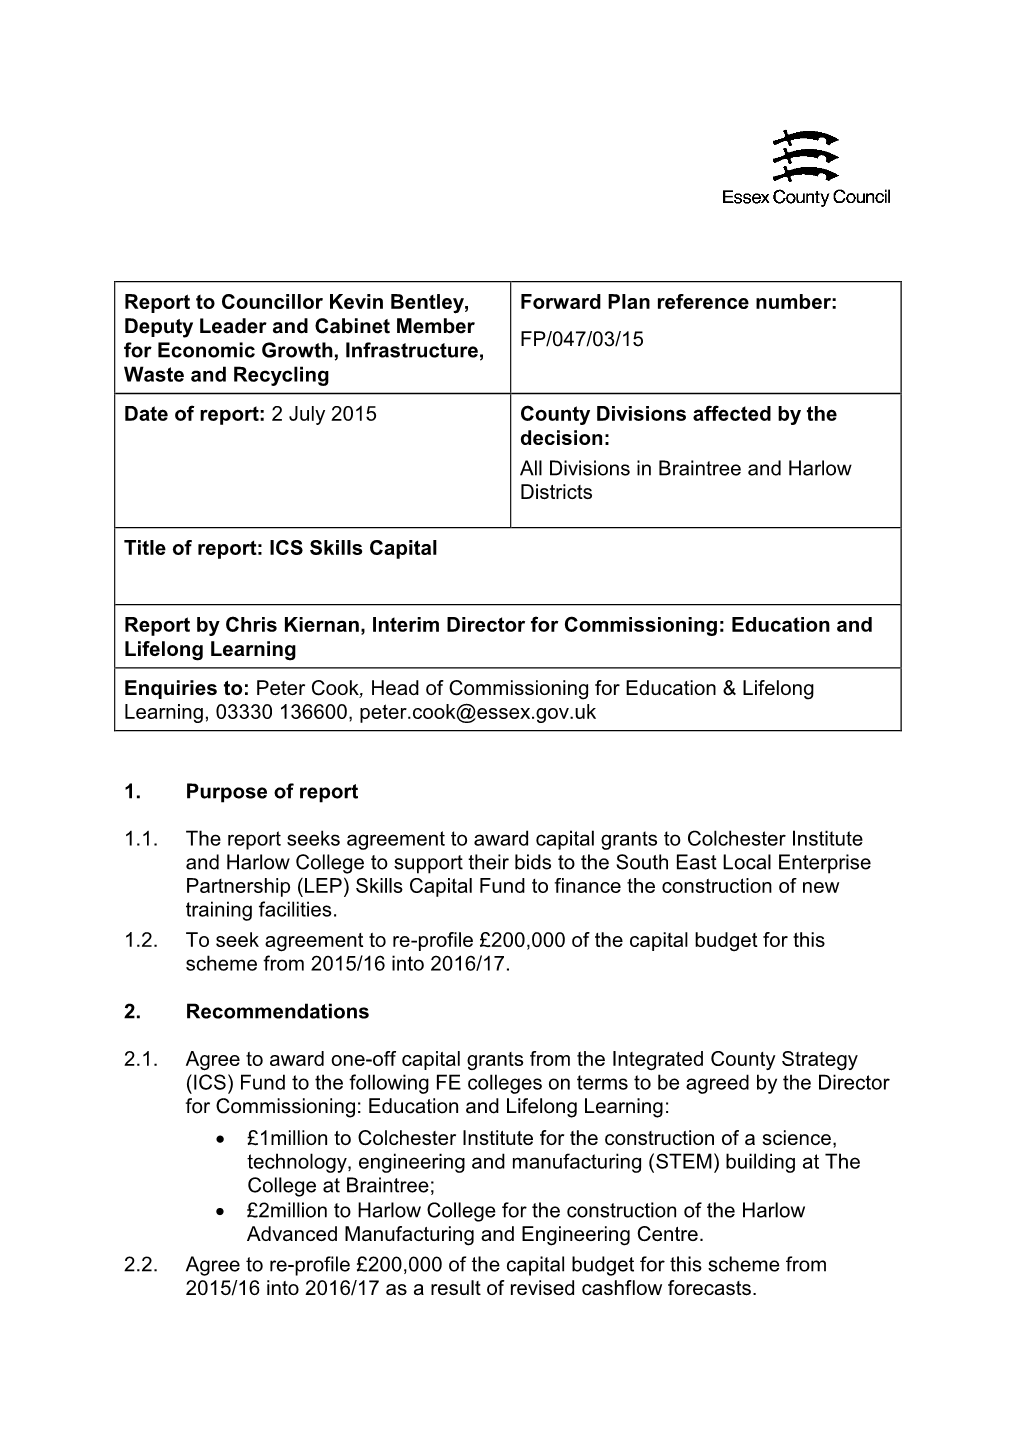 Report to Councillor Kevin Bentley, Deputy Leader and Cabinet